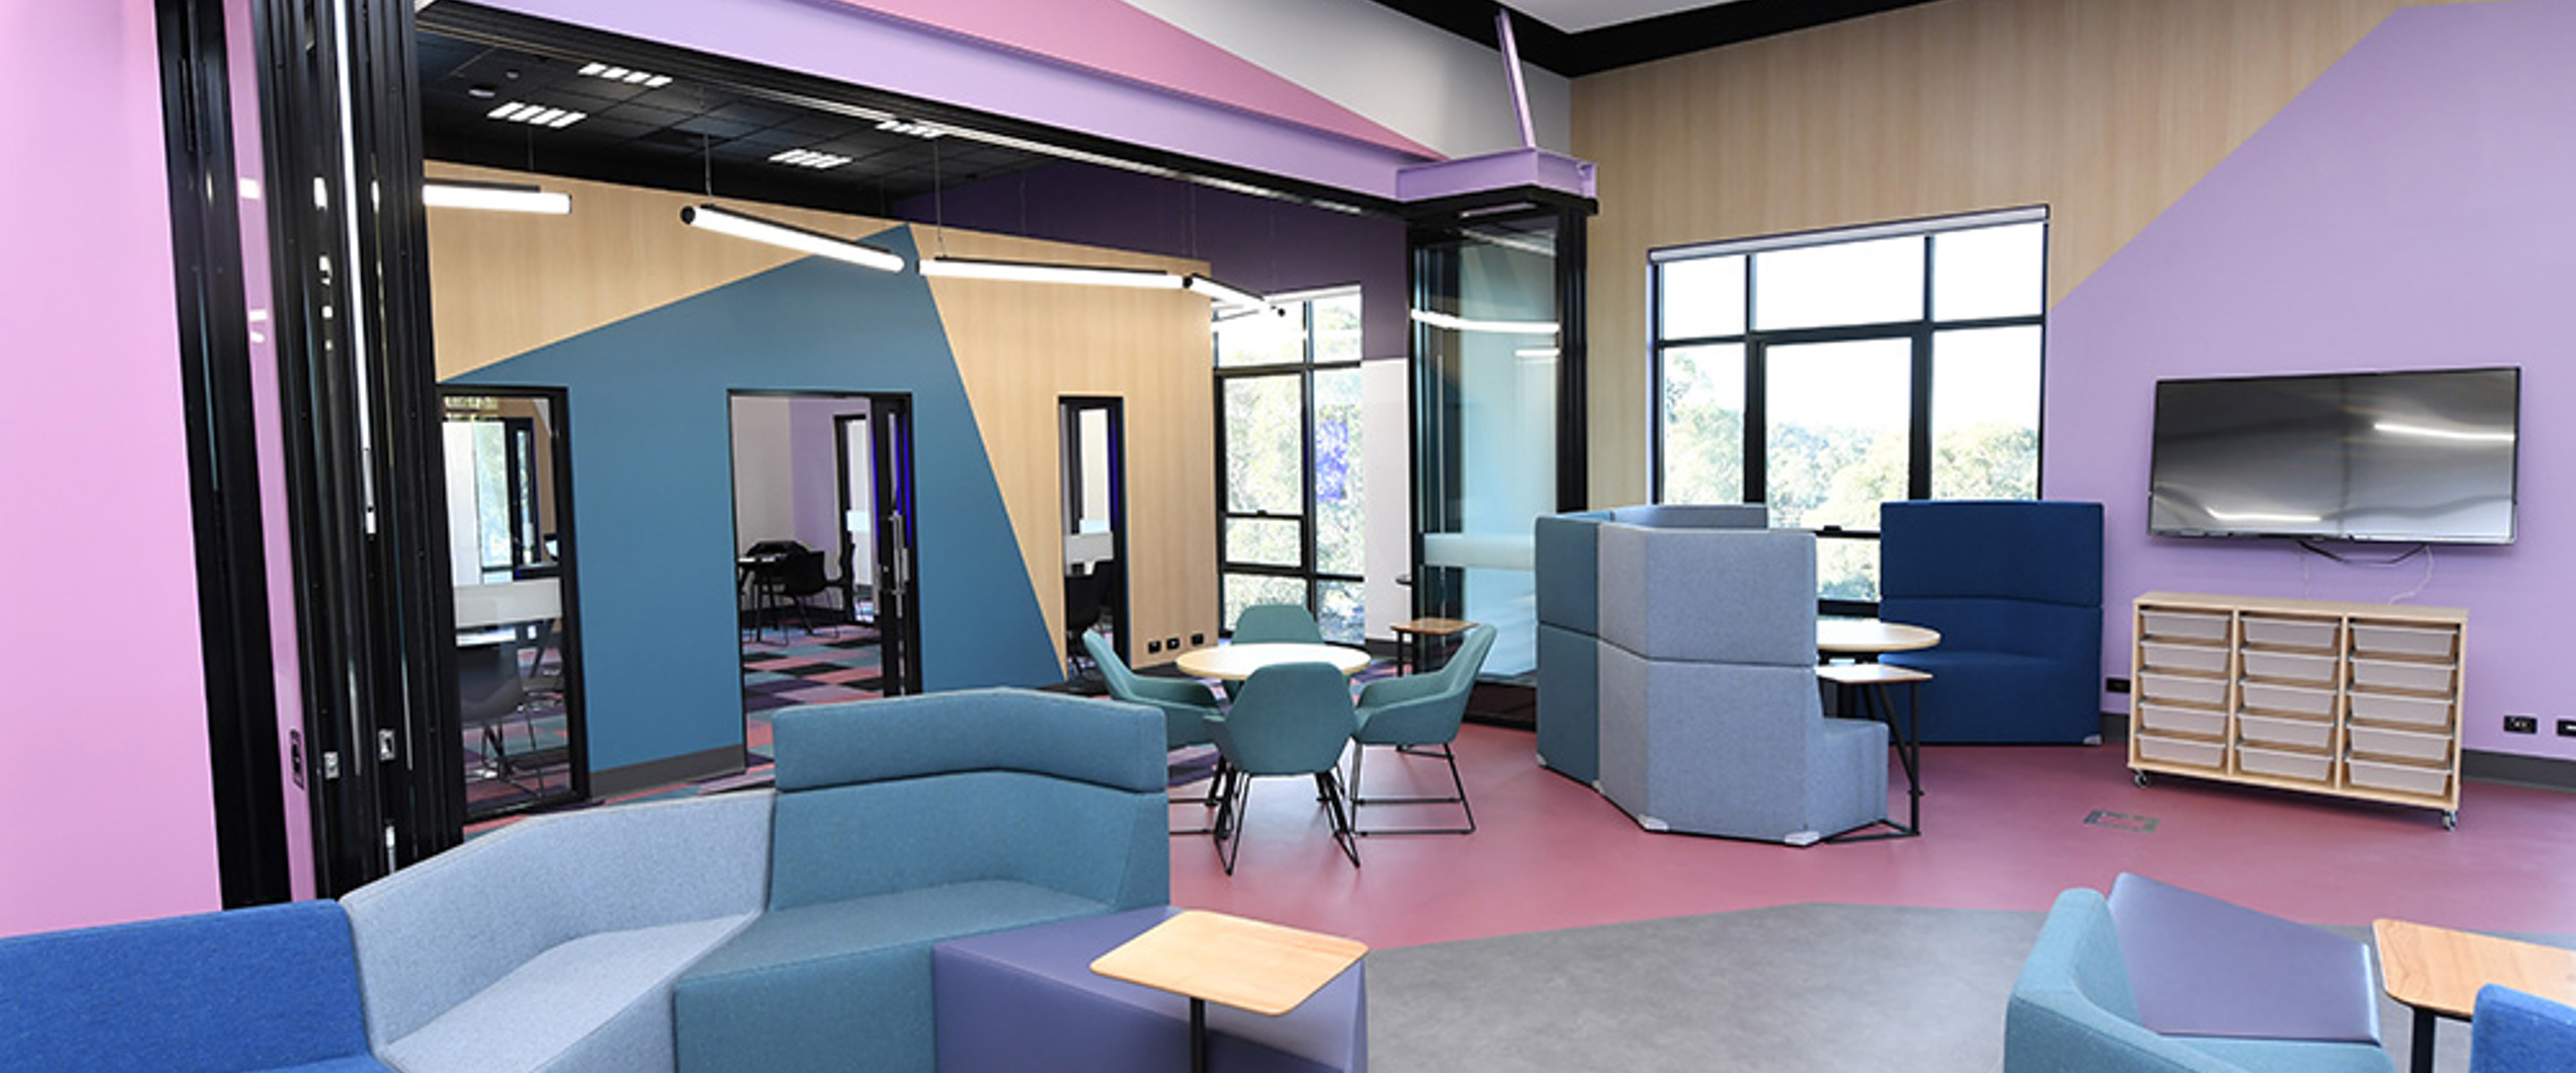 Modern classroom with pink and violet walls and odd geometric shaped furniture.